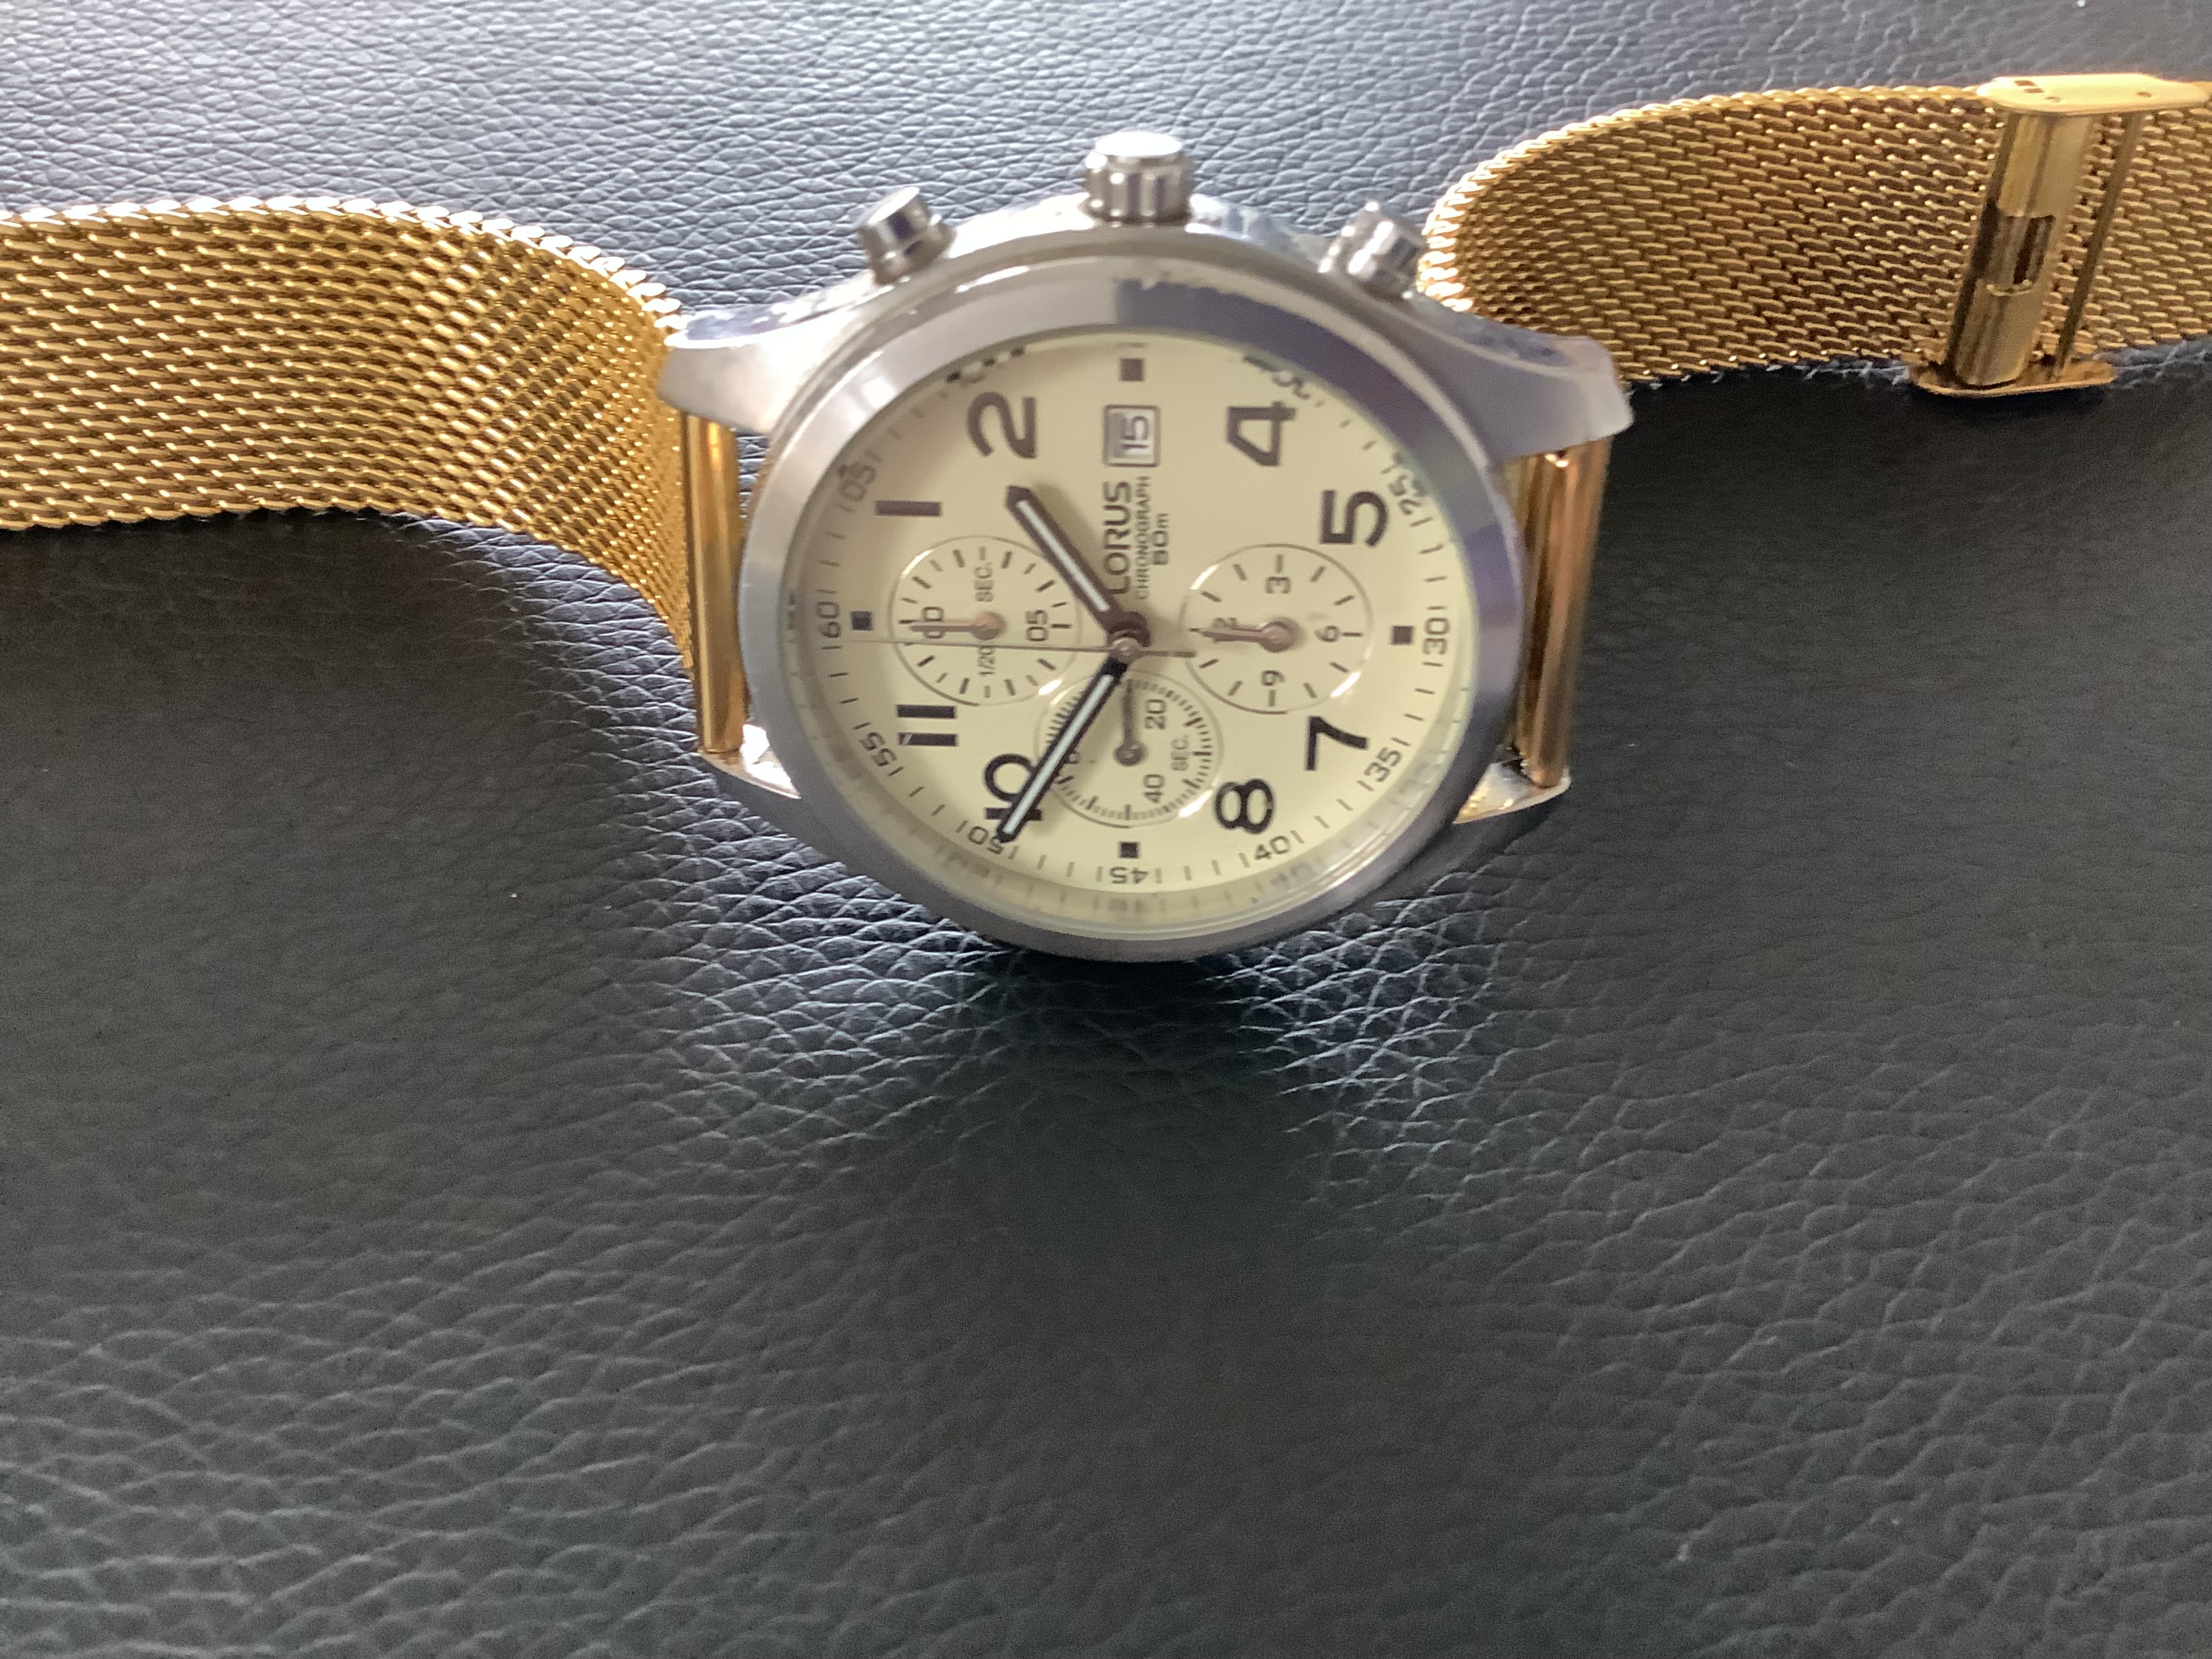 Smart & Elegant Lorus Gold Plated Chronograph Wristwatch (GS 183) Here is a really Smart & - Image 2 of 6